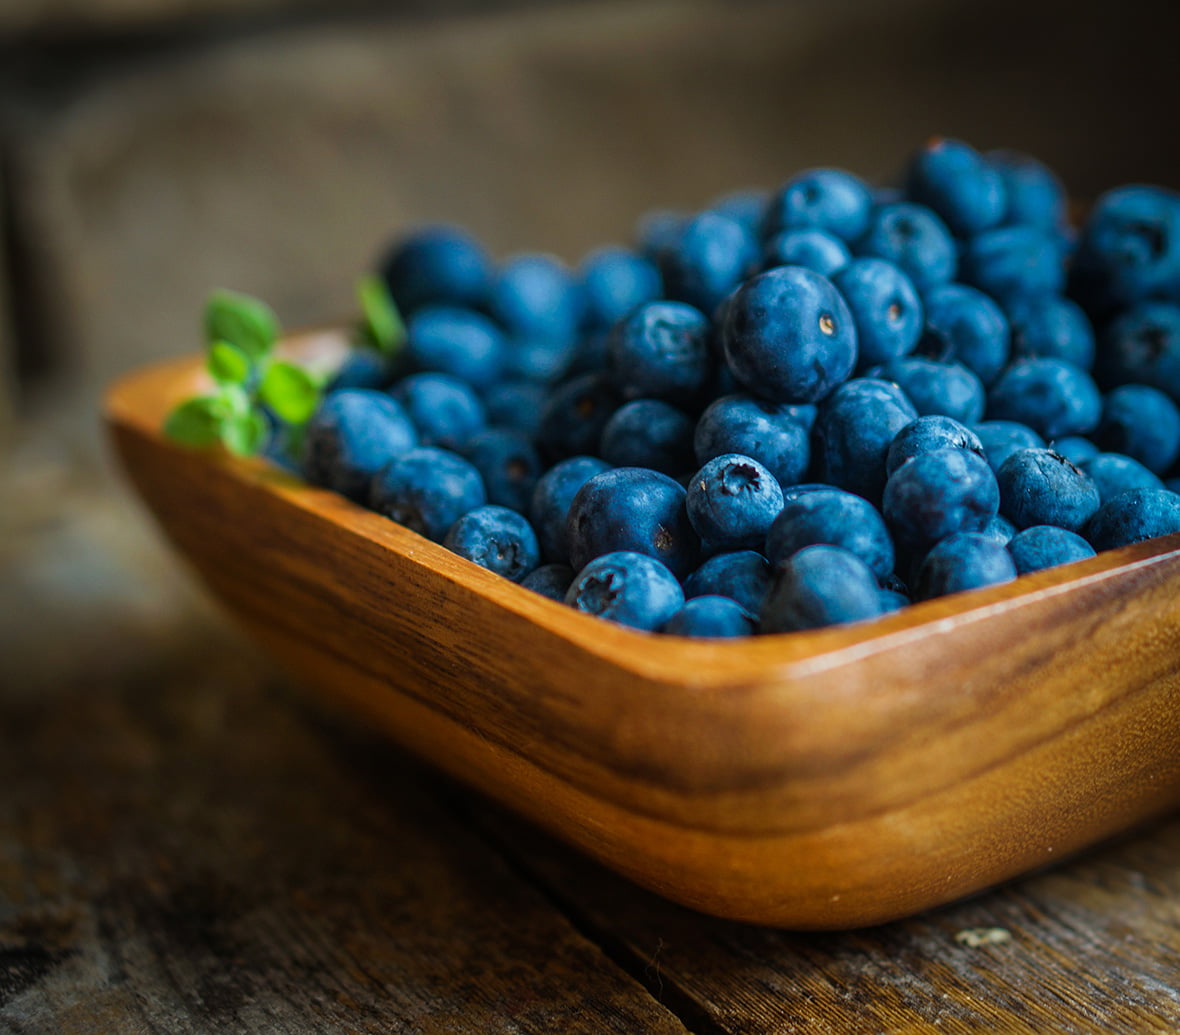 Blueberry vs Bilberry – What is the Difference?